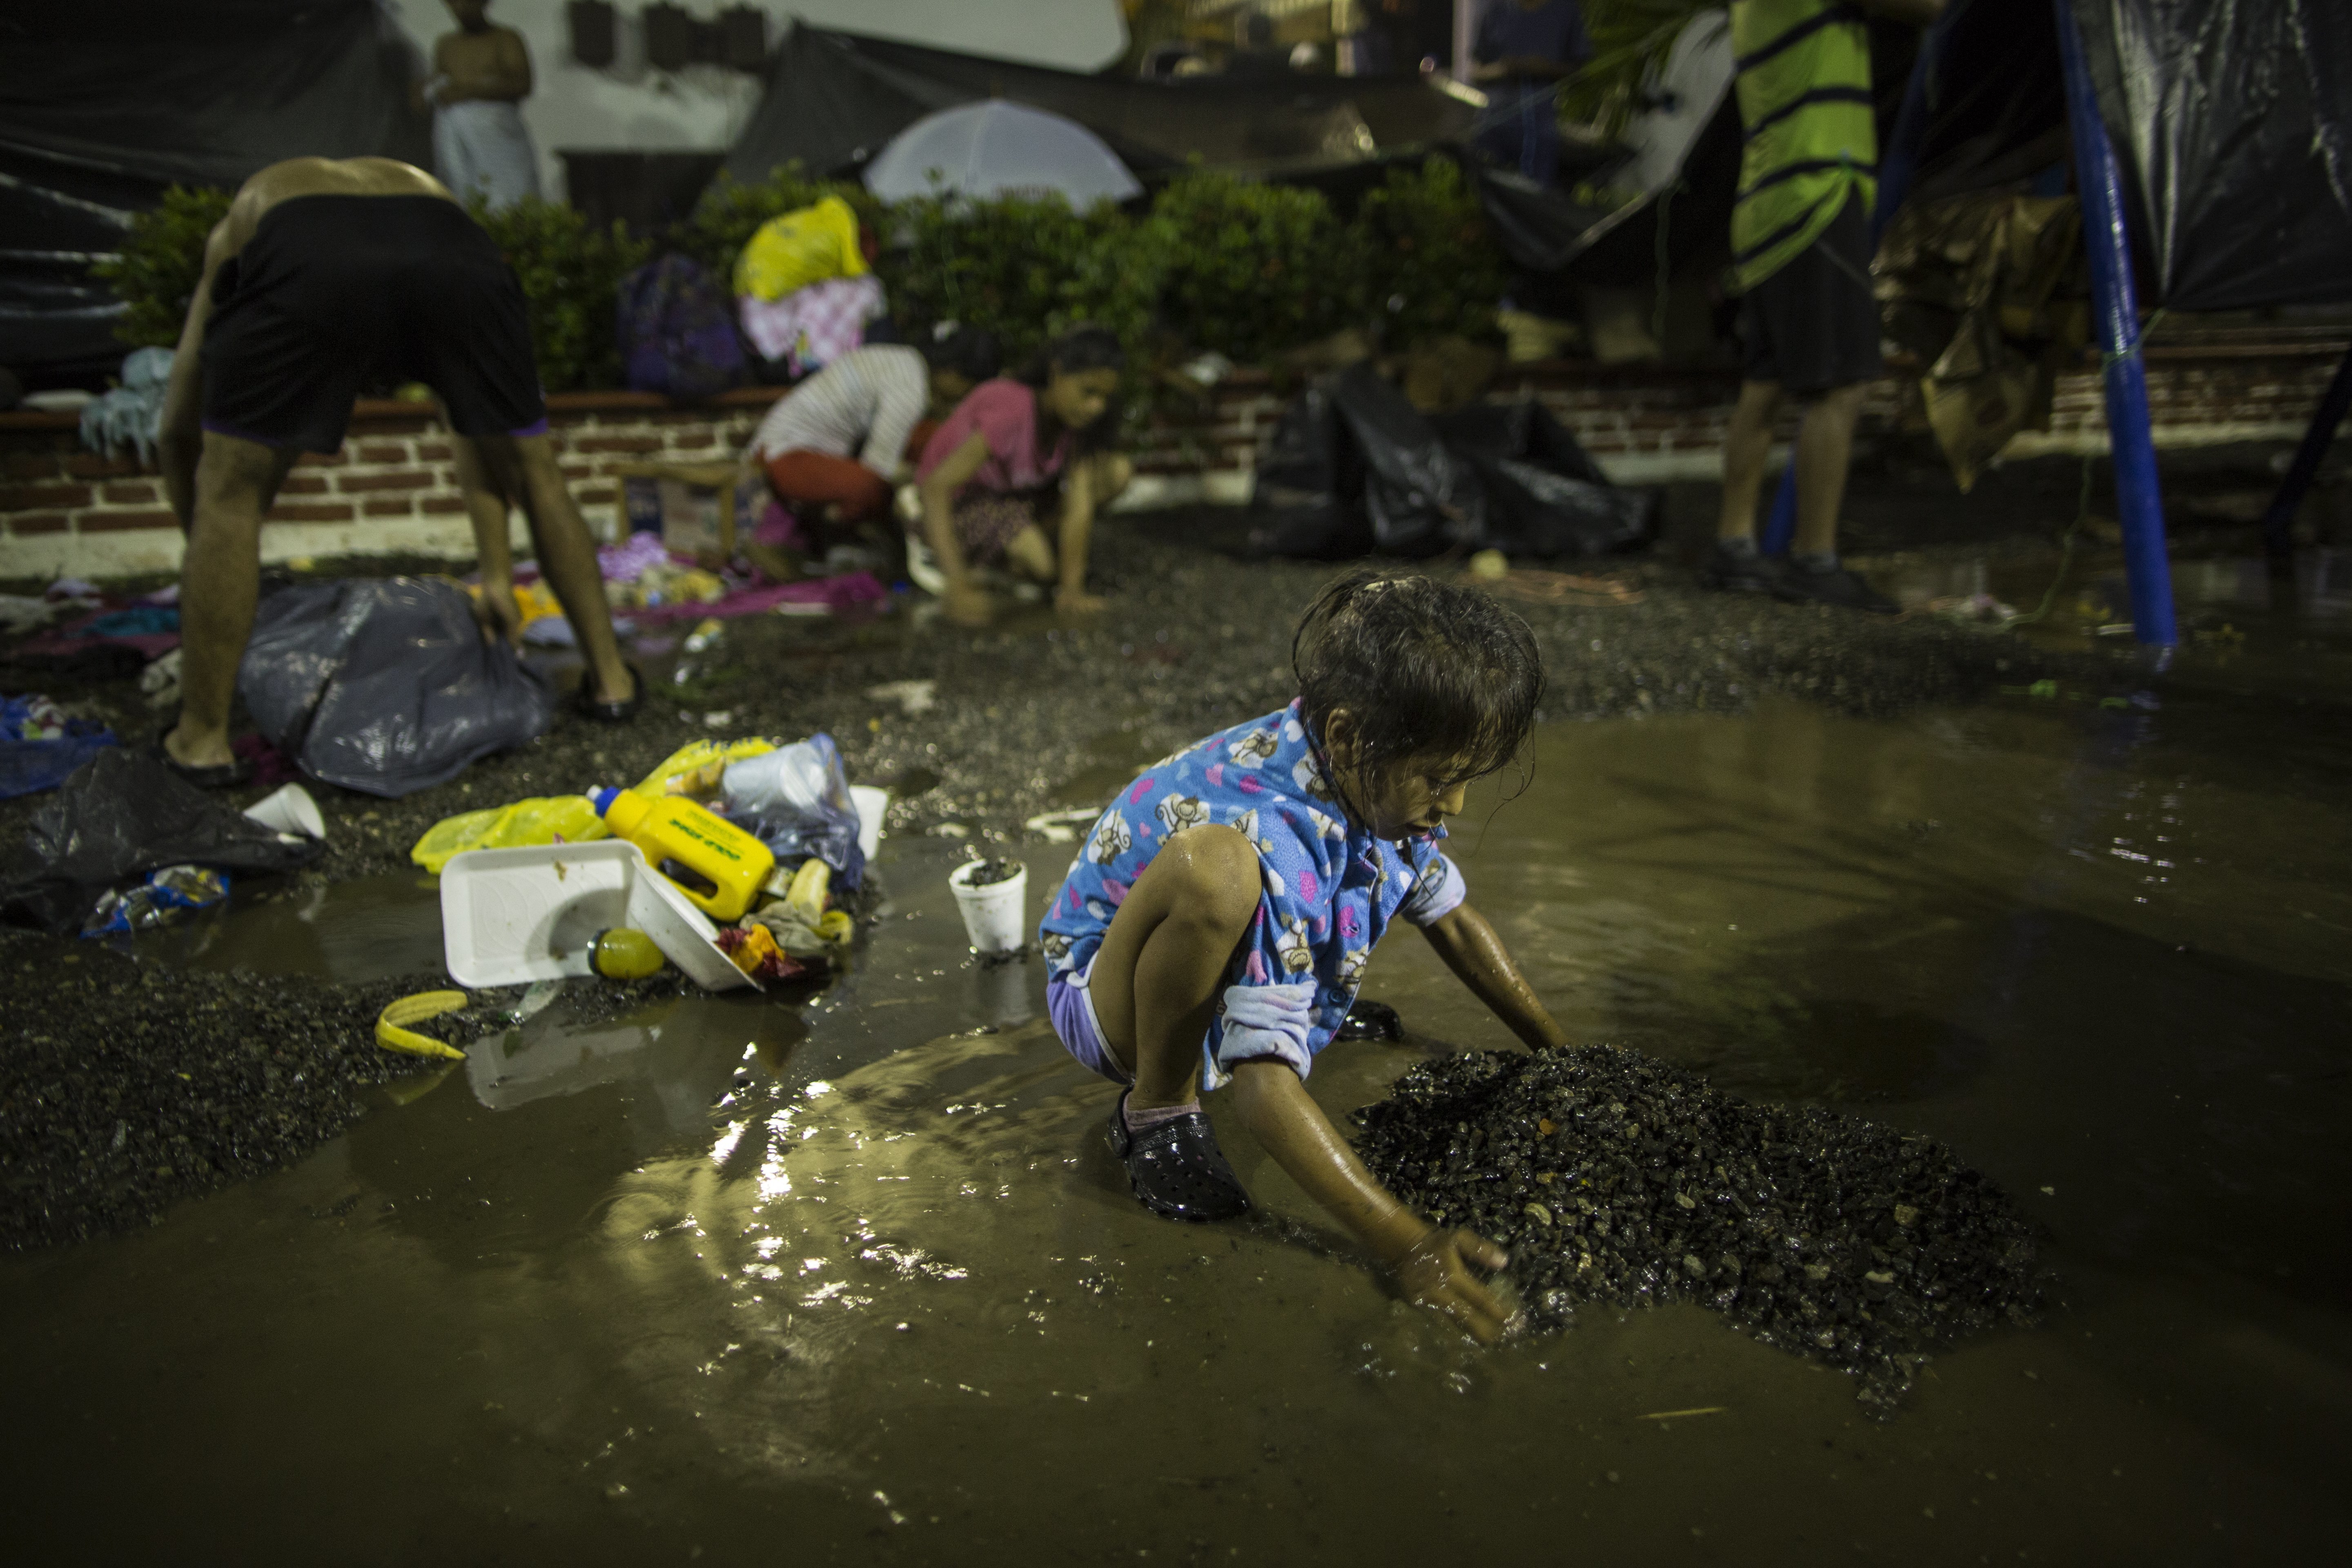 A girl collects small rocks for the base of a makeshift tent to sleep in, after a heavy rain at a makeshift camp set up by the caravan of Central American migrants traveling to the U.S, in Mapastepec, Mexico, Wednesday, Oct. 24, 2018. Thousands of Central American migrants renewed their hoped-for march to the United States on Wednesday, setting out before dawn with more than 1,000 miles still before them. (AP Photo/Rodrigo Abd)